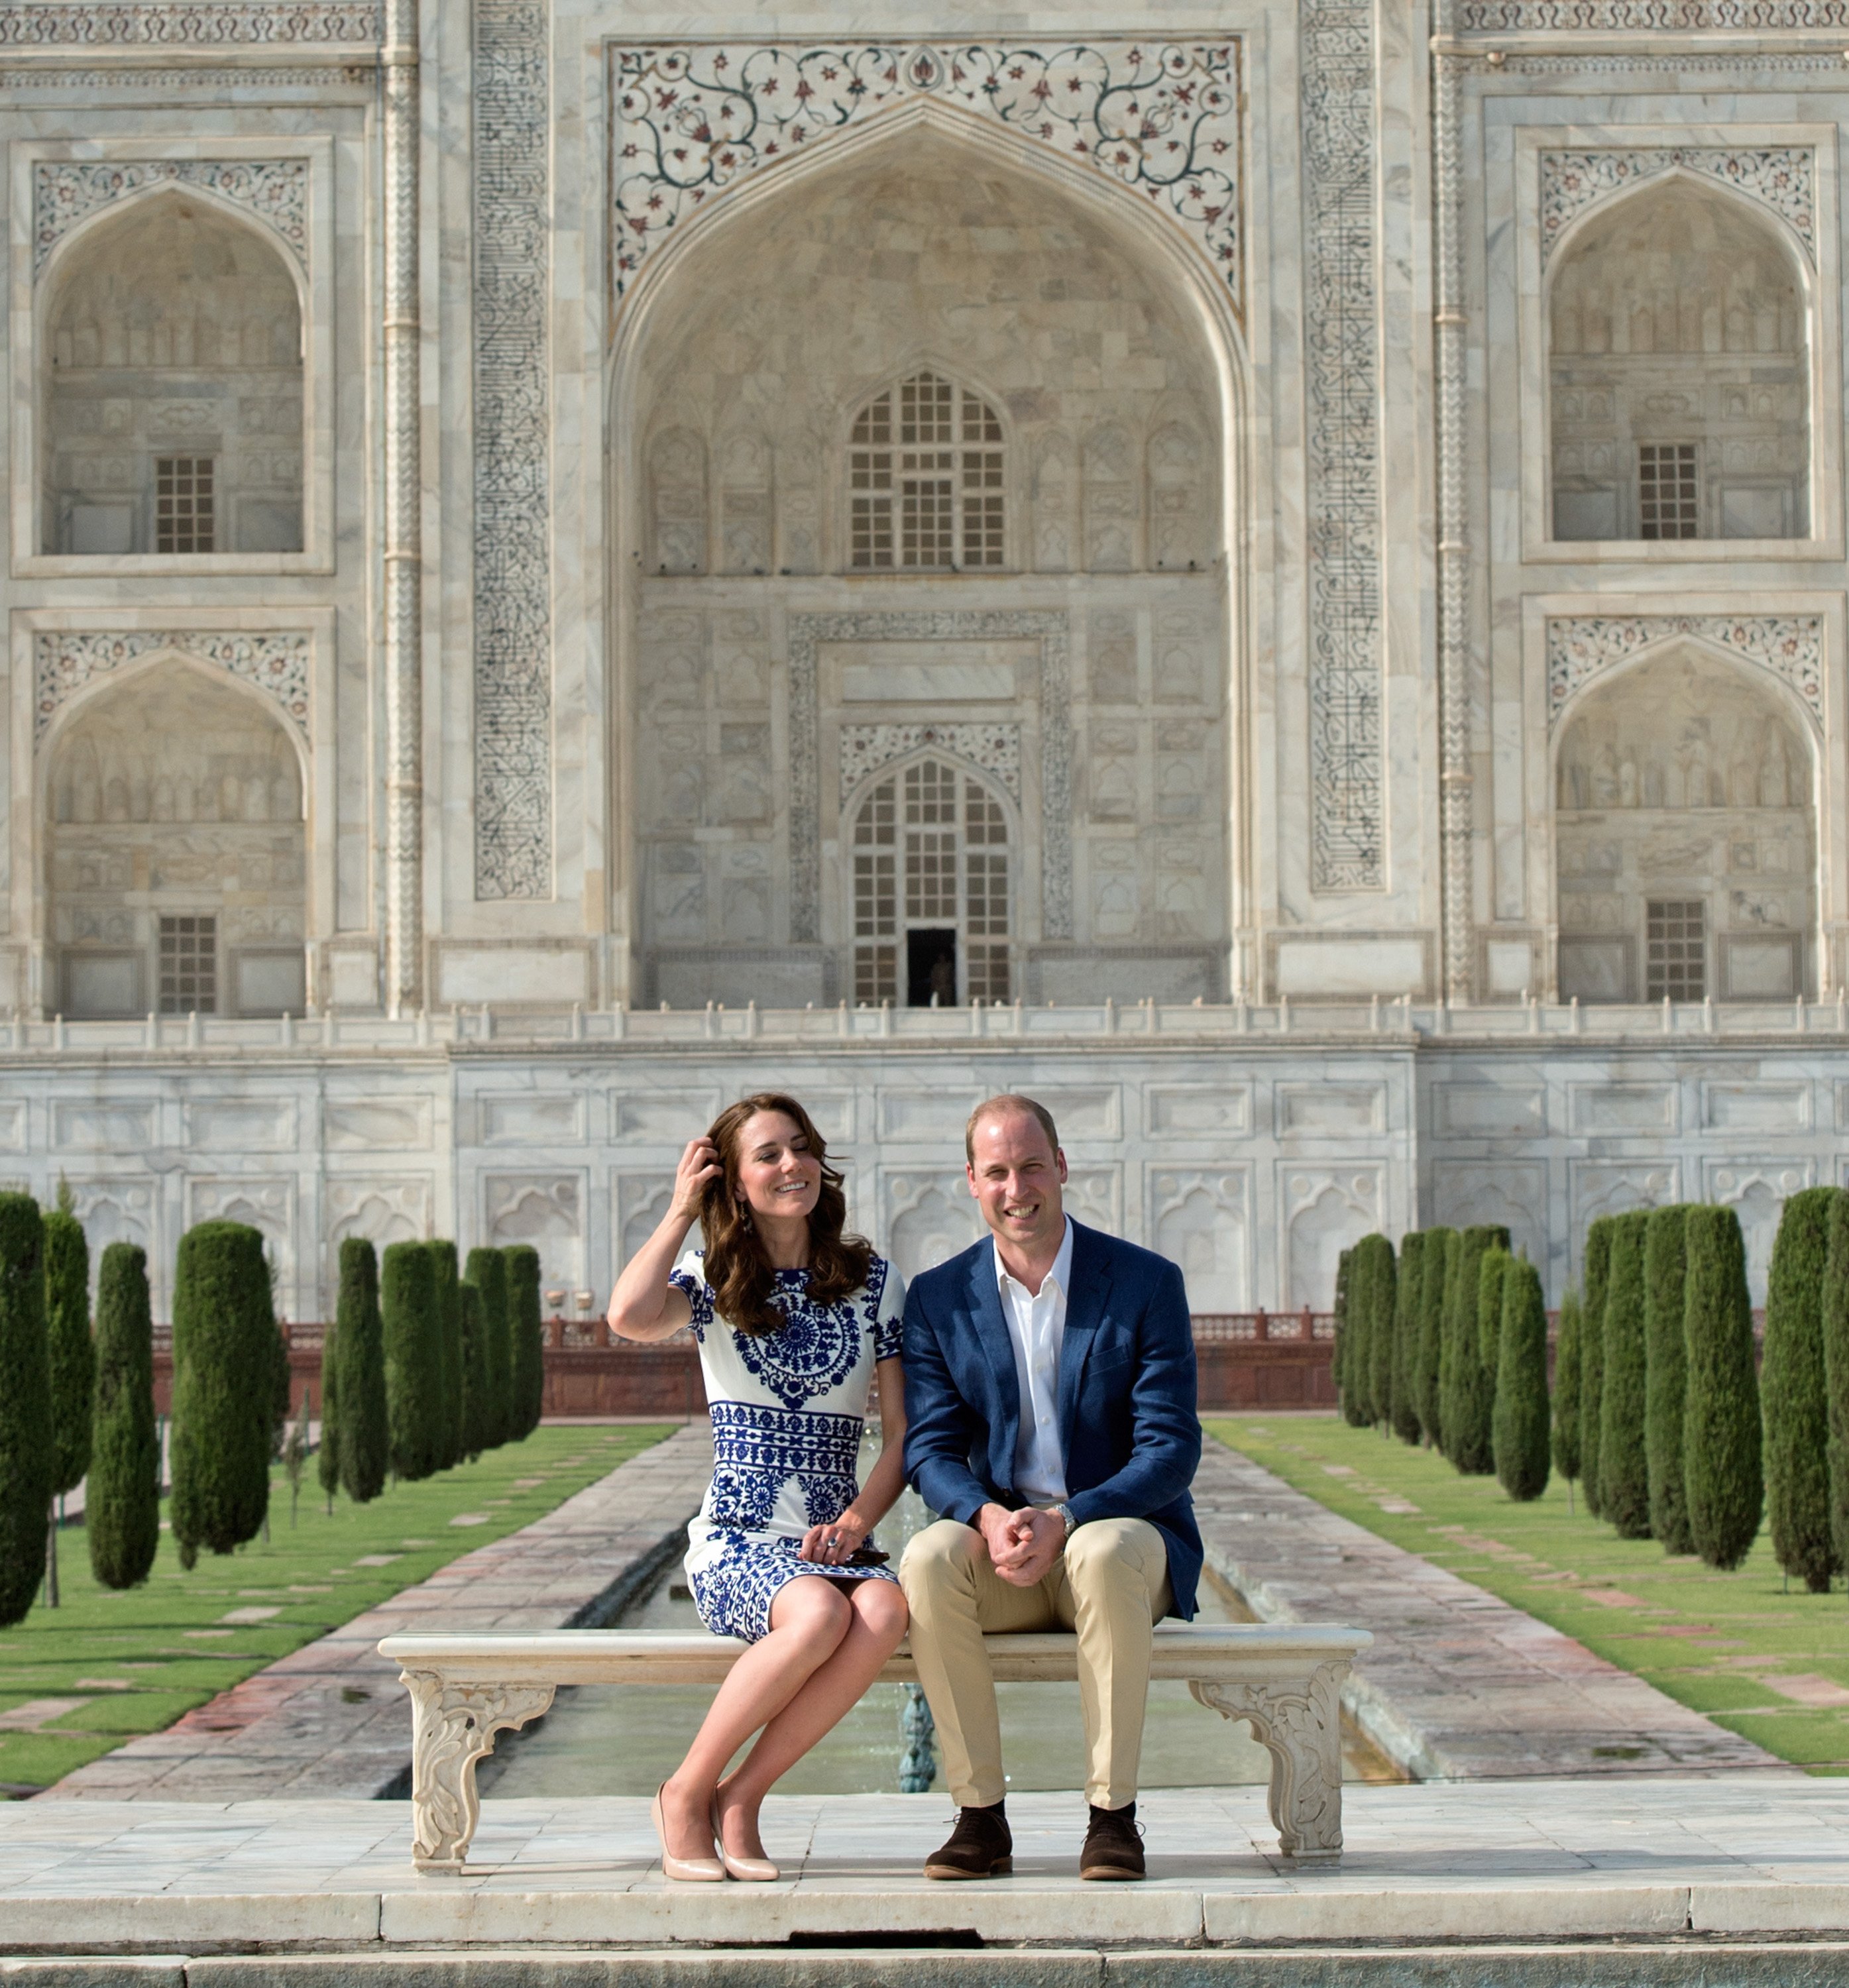 Prince William, Duke of Cambridge and Catherine, Duchess of Cambridge pose in front of the Taj Mahal on April 16, 2016 in New Delhi, India | Photo: Getty Images